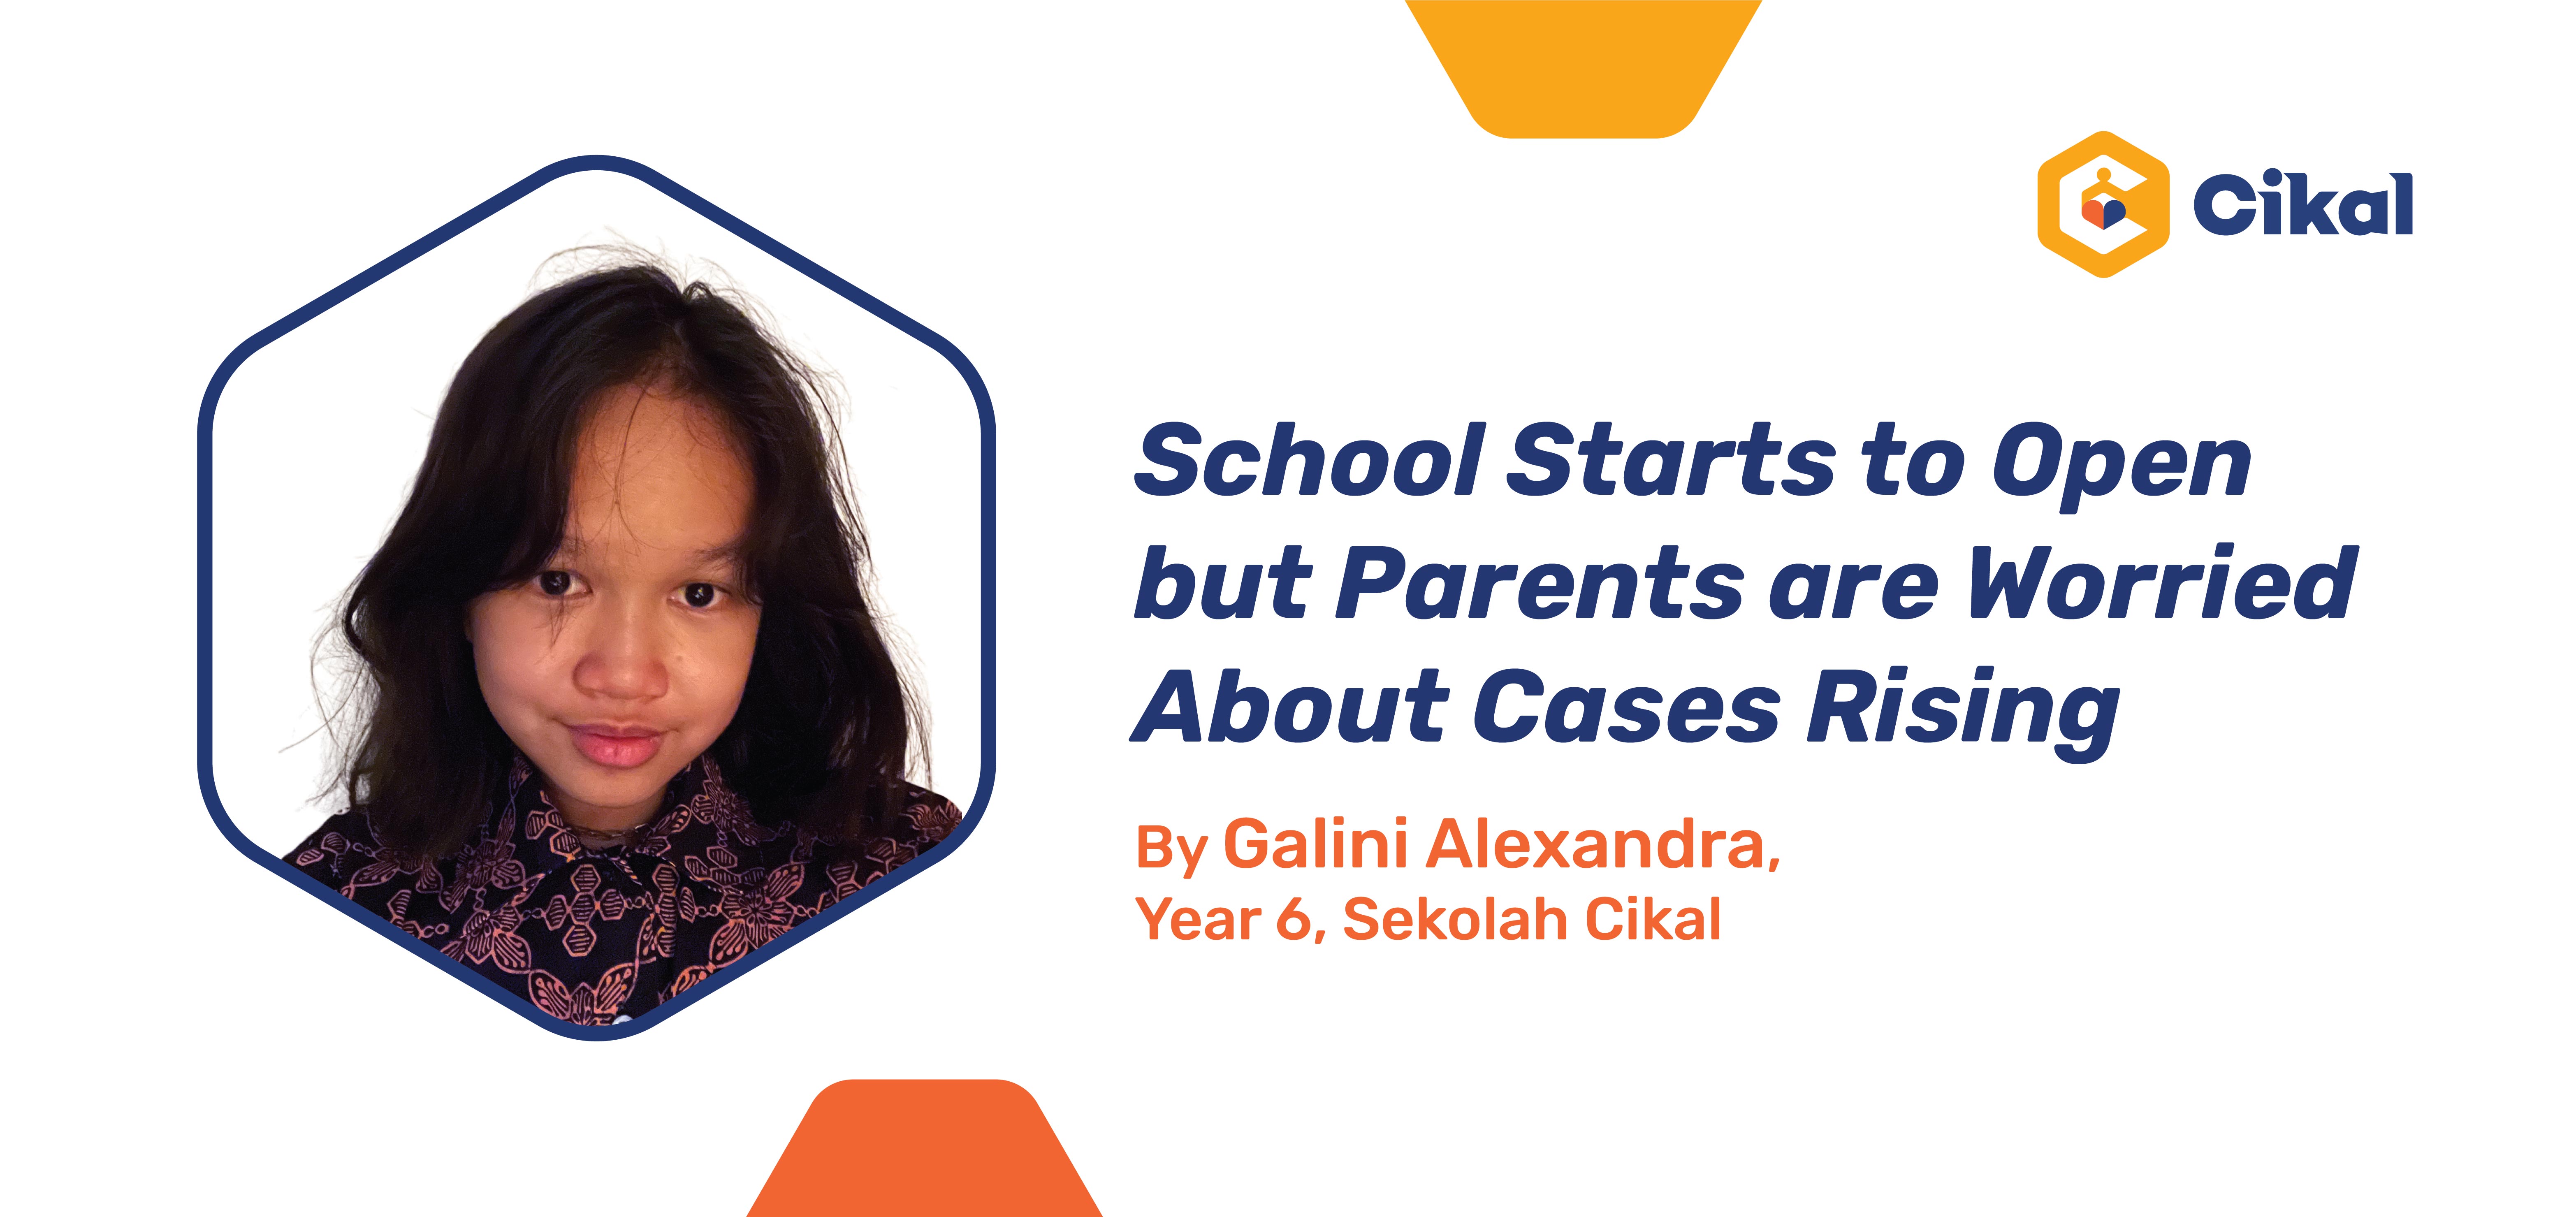 School Starts to Open but Parents are Worried About Cases Rising By Galini Alexandra, Year 6, Sekolah Cikal 